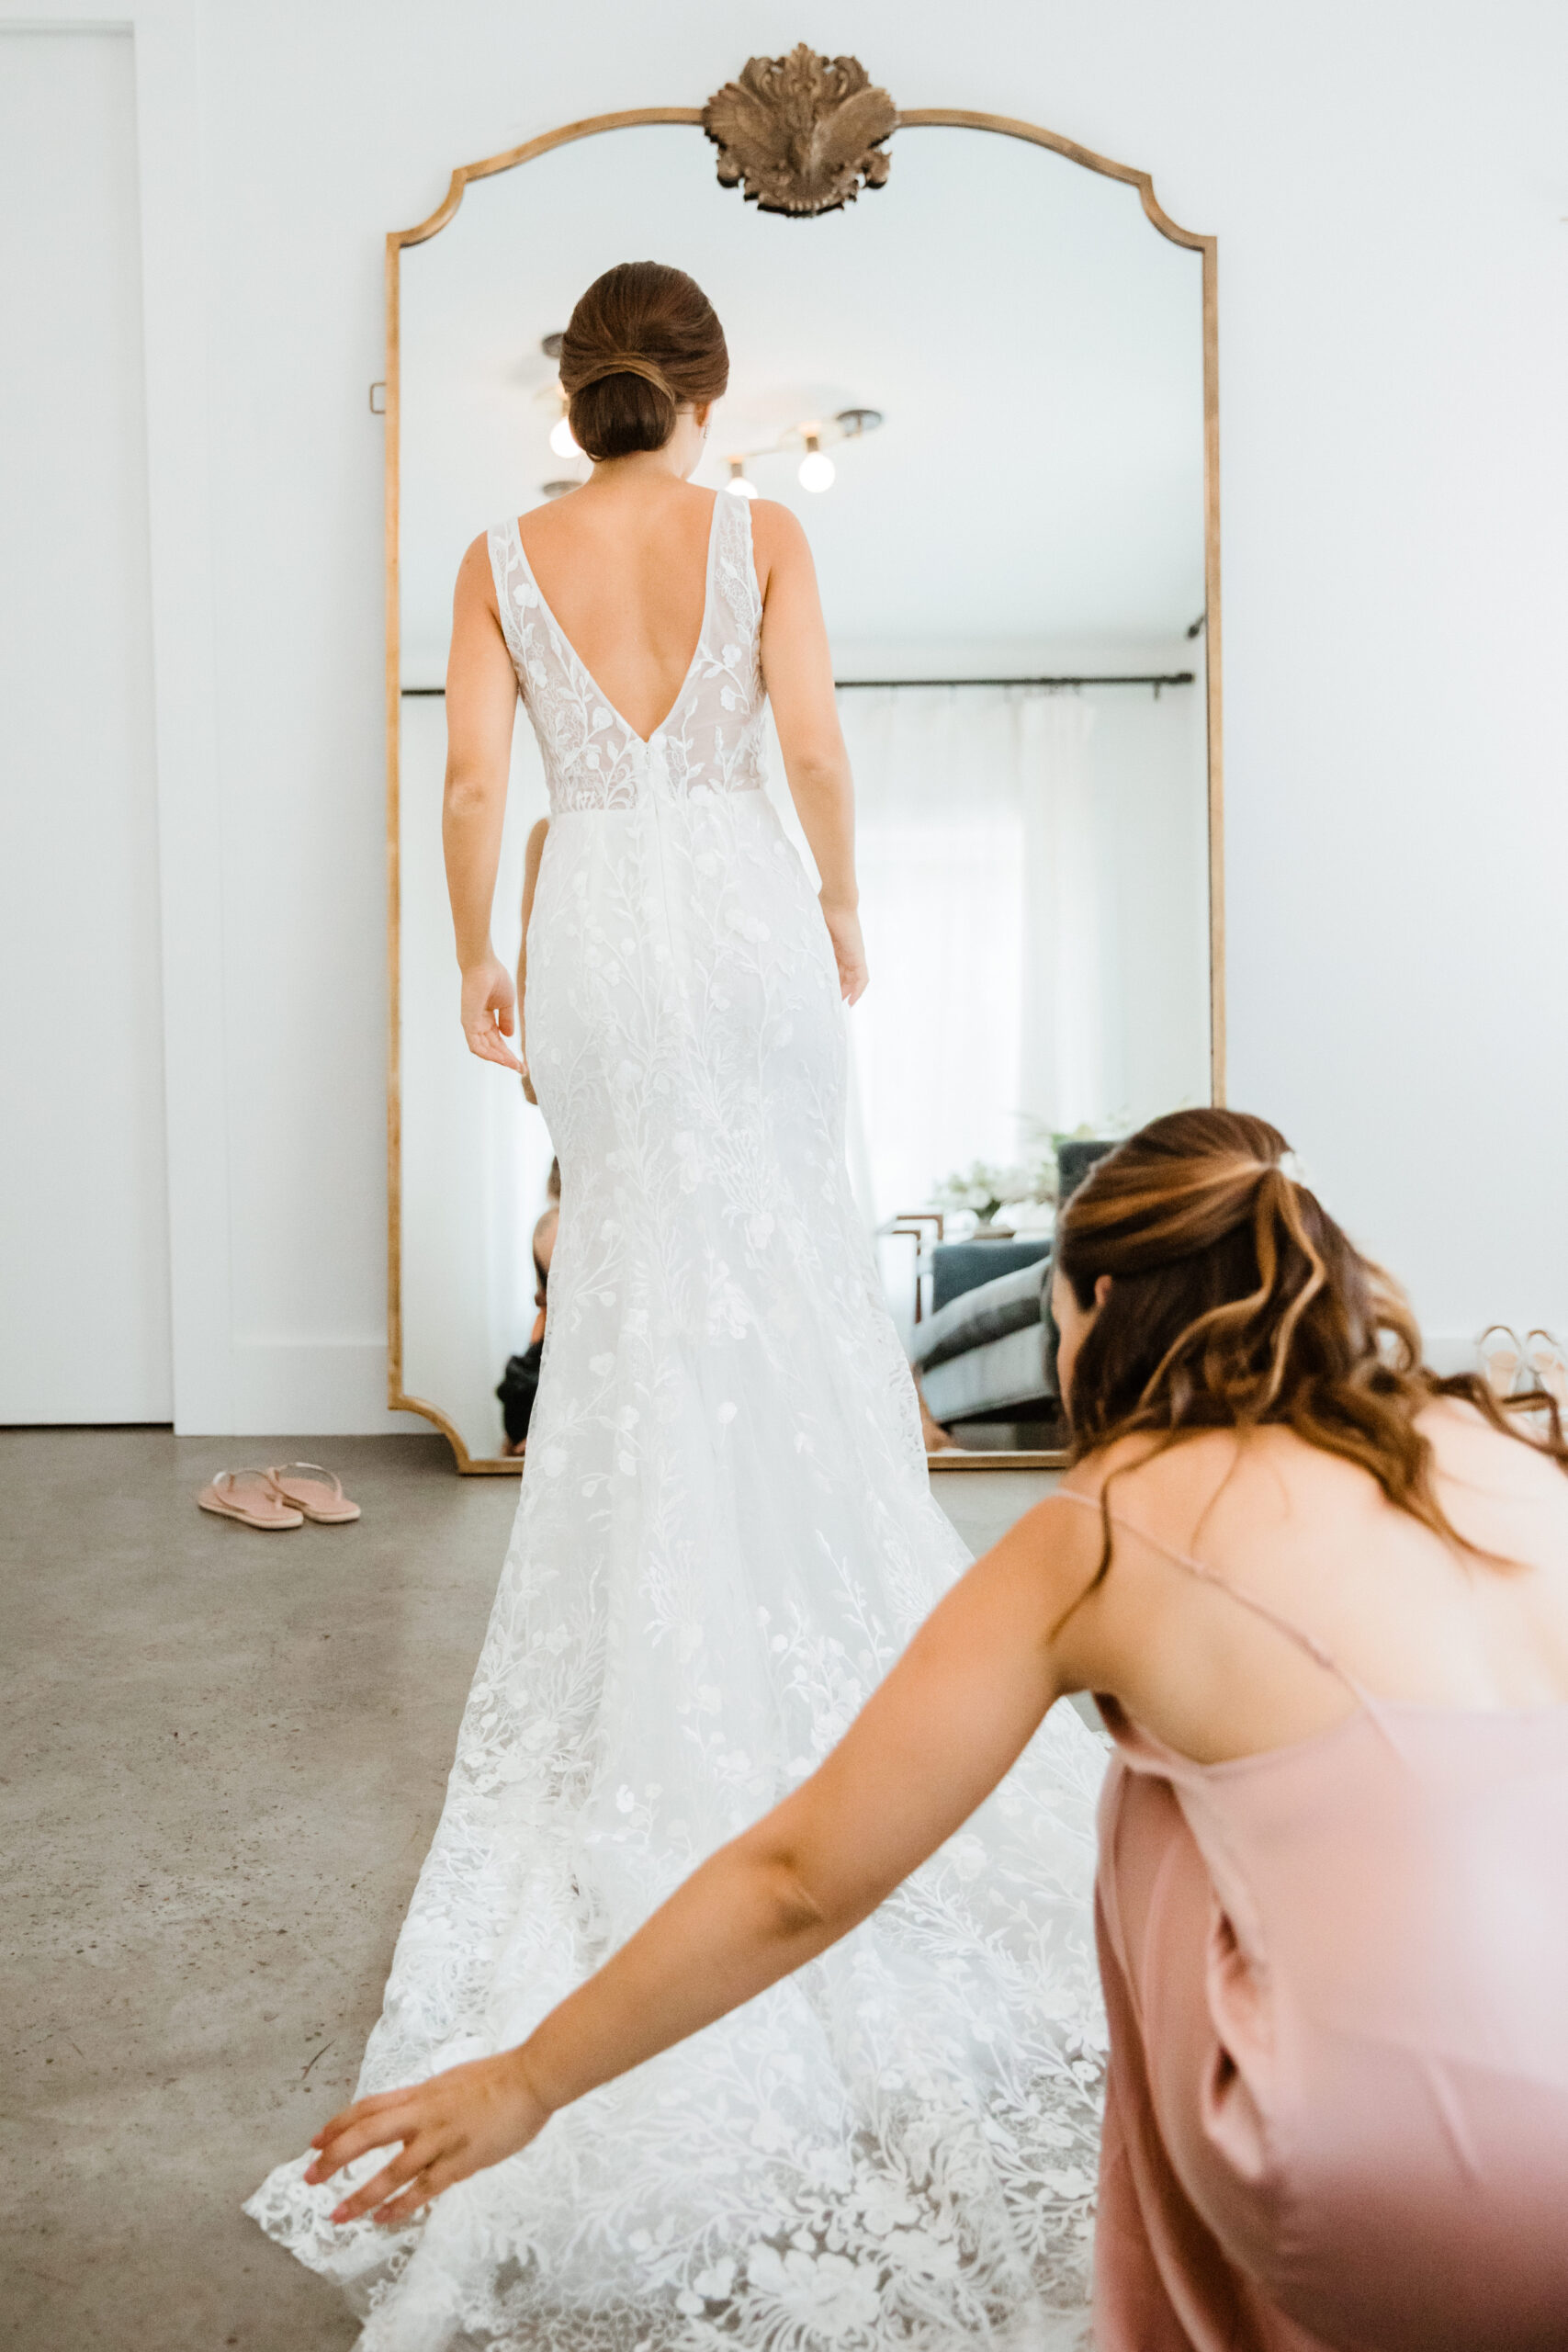 Beautiful bride prepares for her dreamy upstate New York wedding day